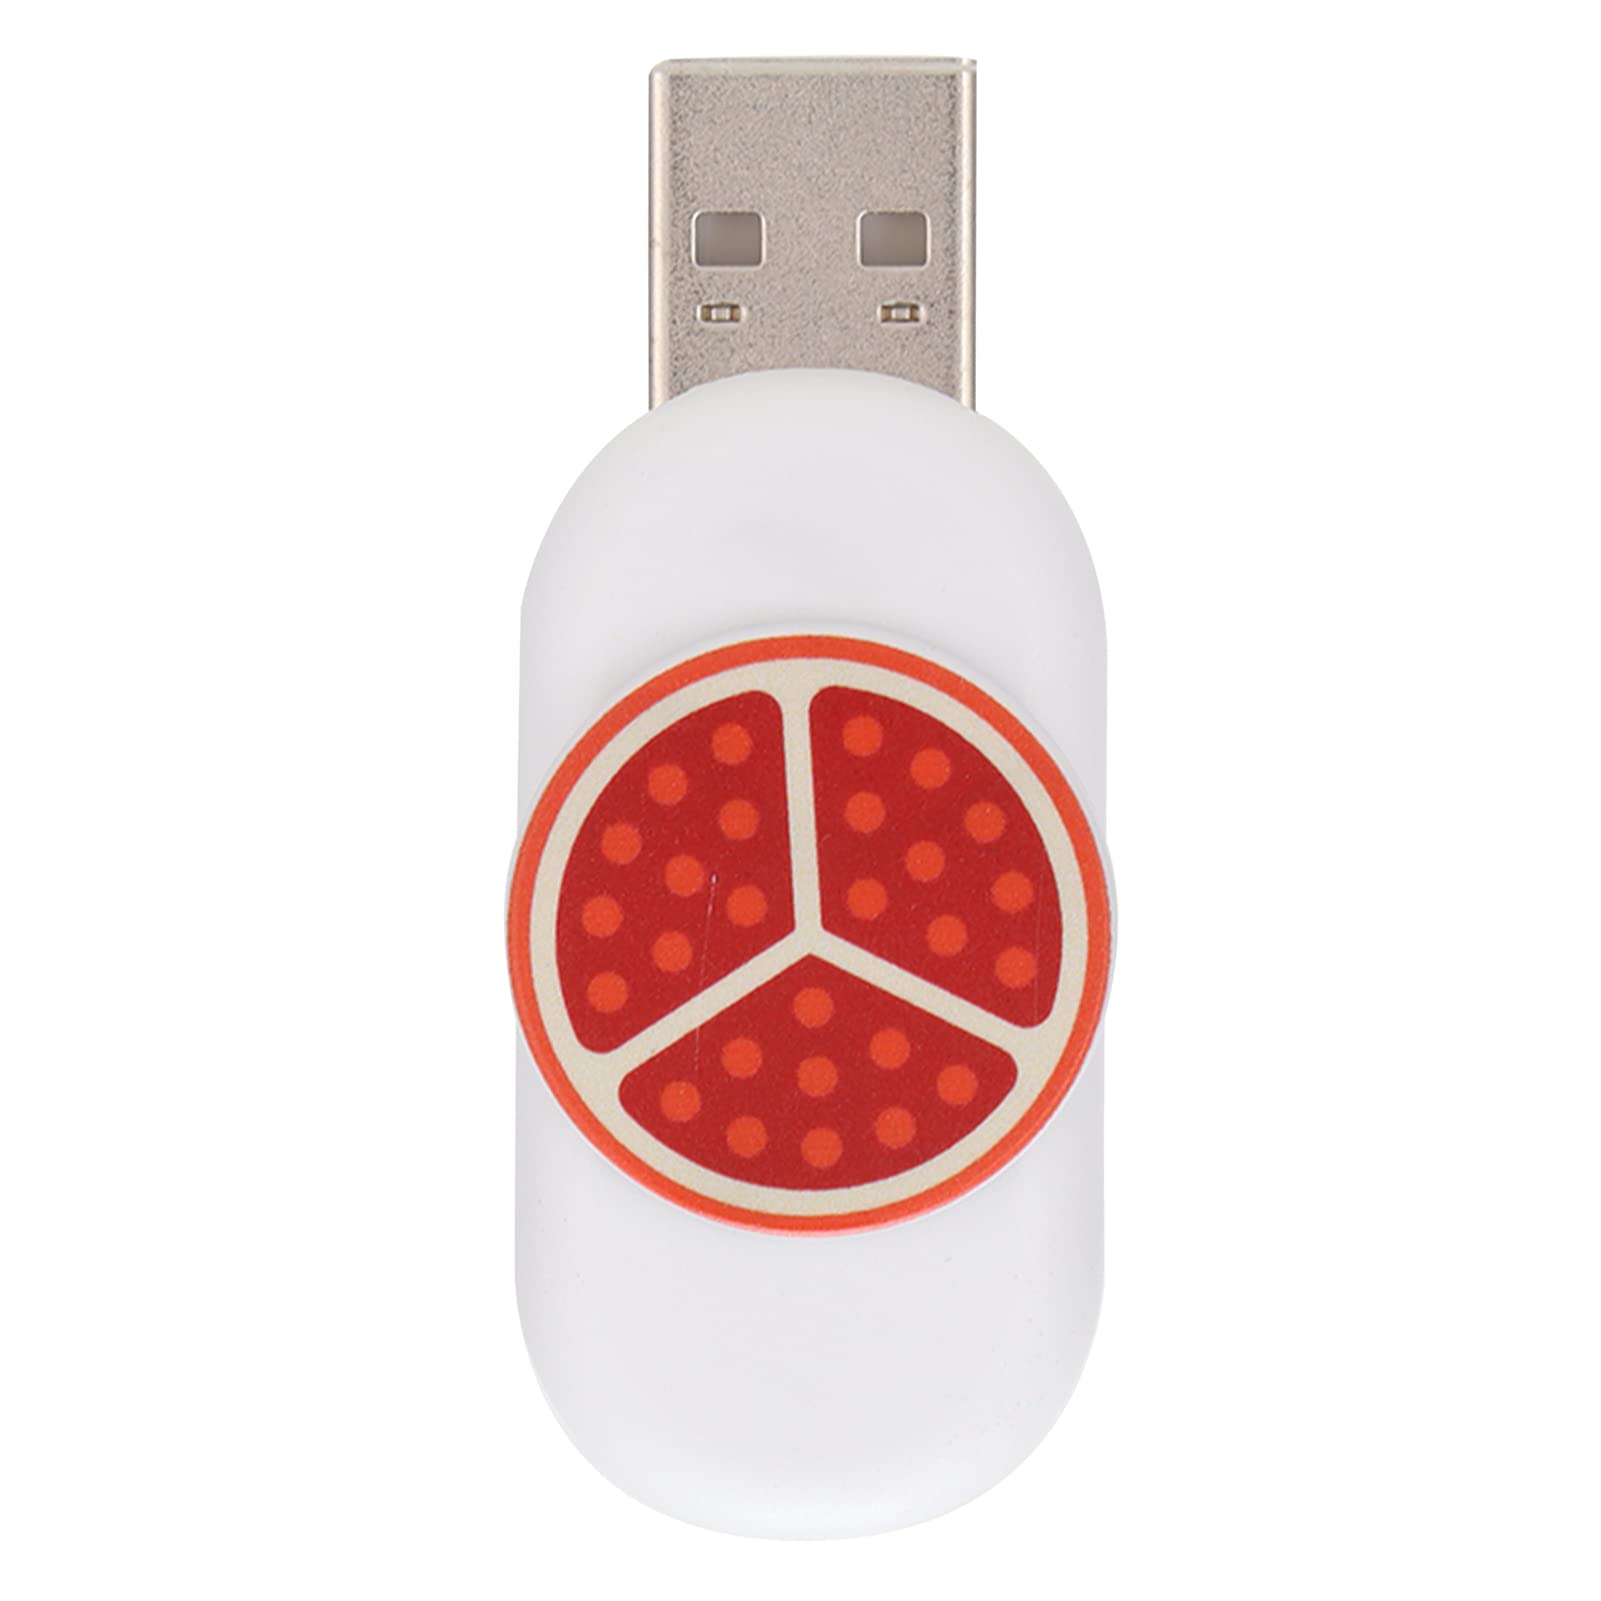 USB drive with a red X symbol.